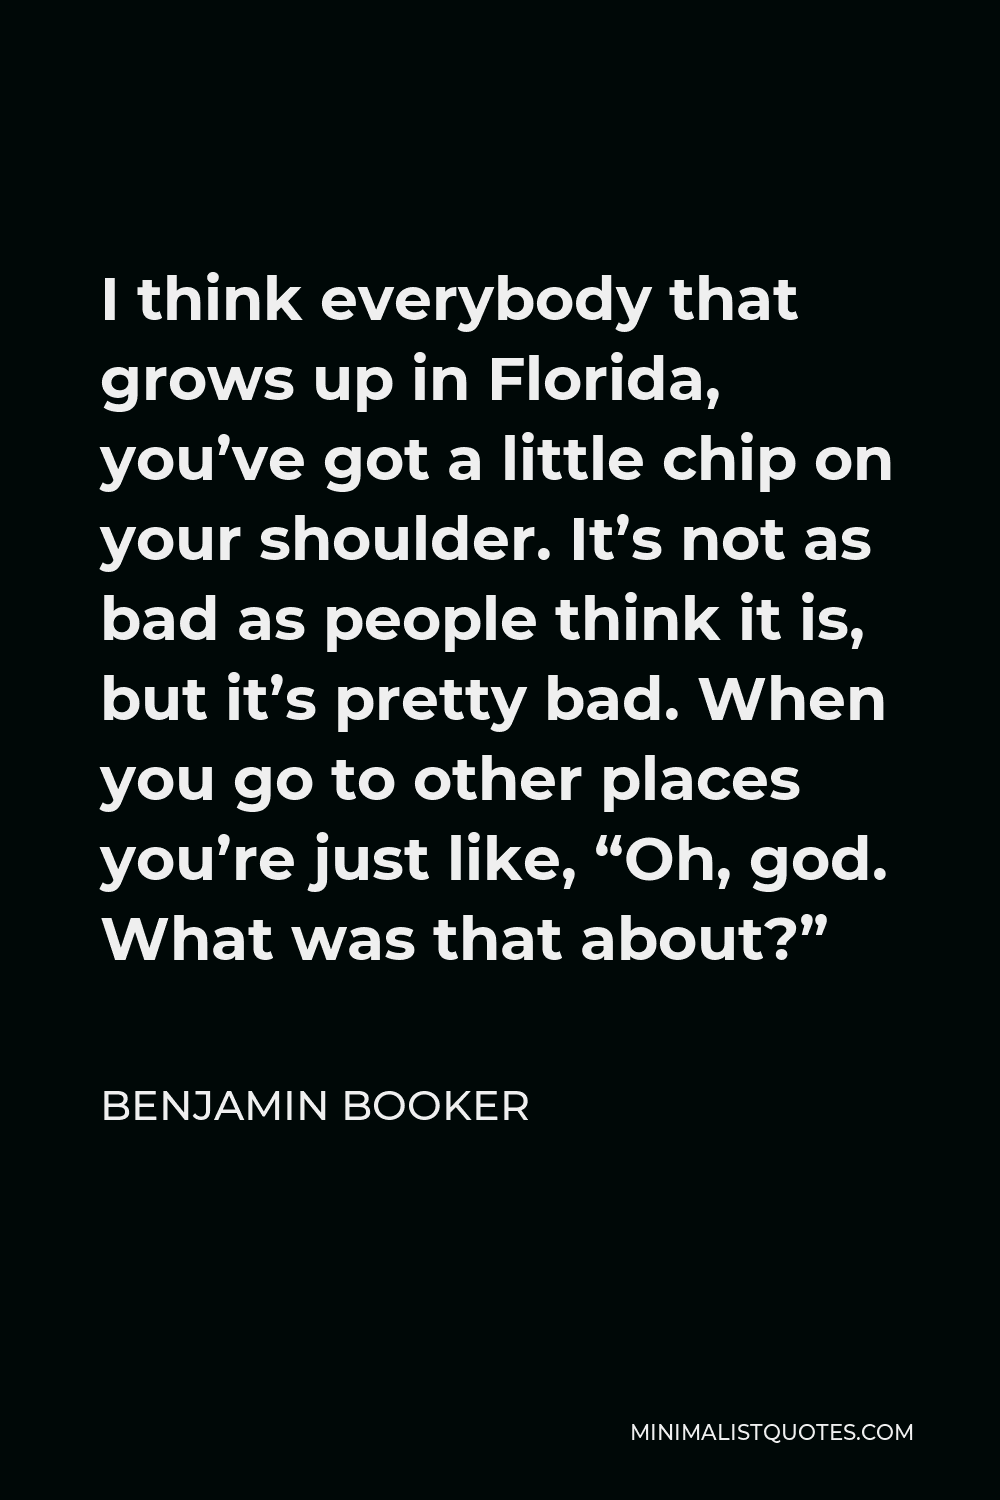 Benjamin Booker Quote - I think everybody that grows up in Florida, you’ve got a little chip on your shoulder. It’s not as bad as people think it is, but it’s pretty bad. When you go to other places you’re just like, “Oh, god. What was that about?”